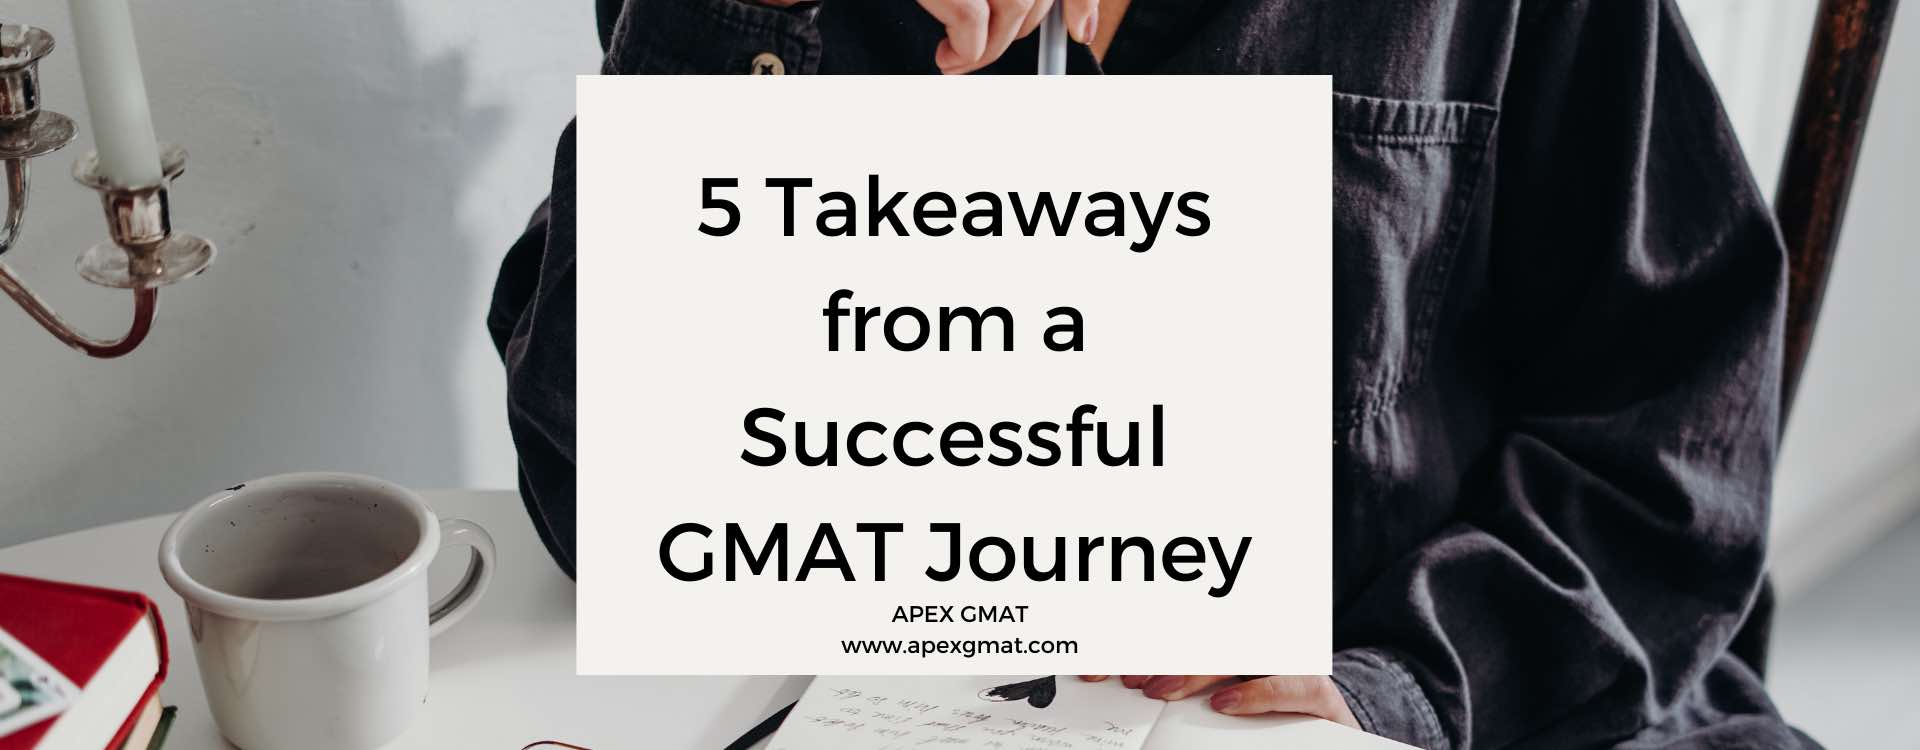 5 Takeaways from a Successful GMAT Journey